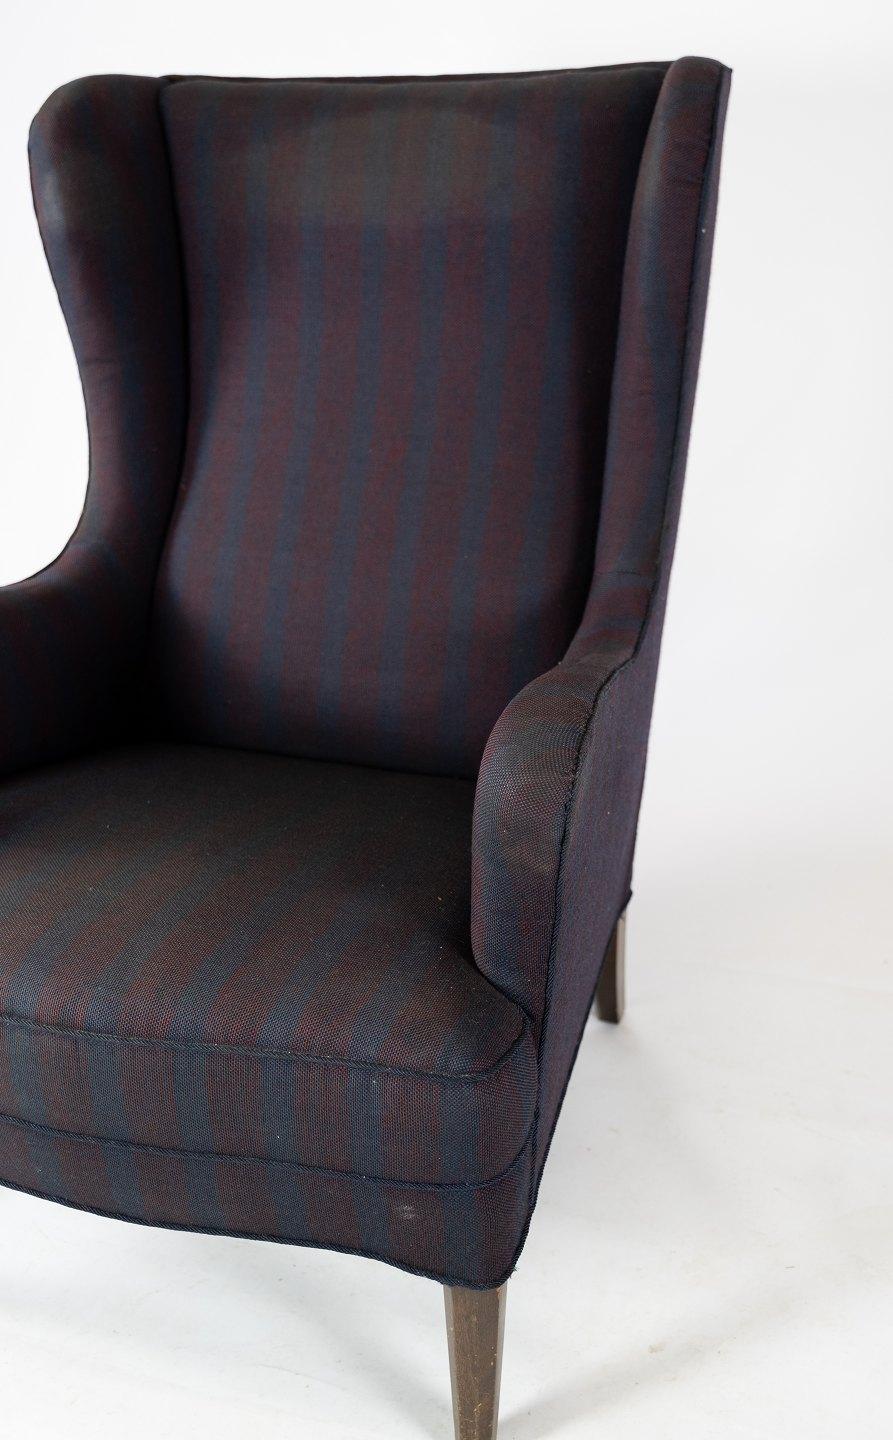 Other Tall Easy Chair with Dark Striped Fabric, in Great Vintage Condition For Sale